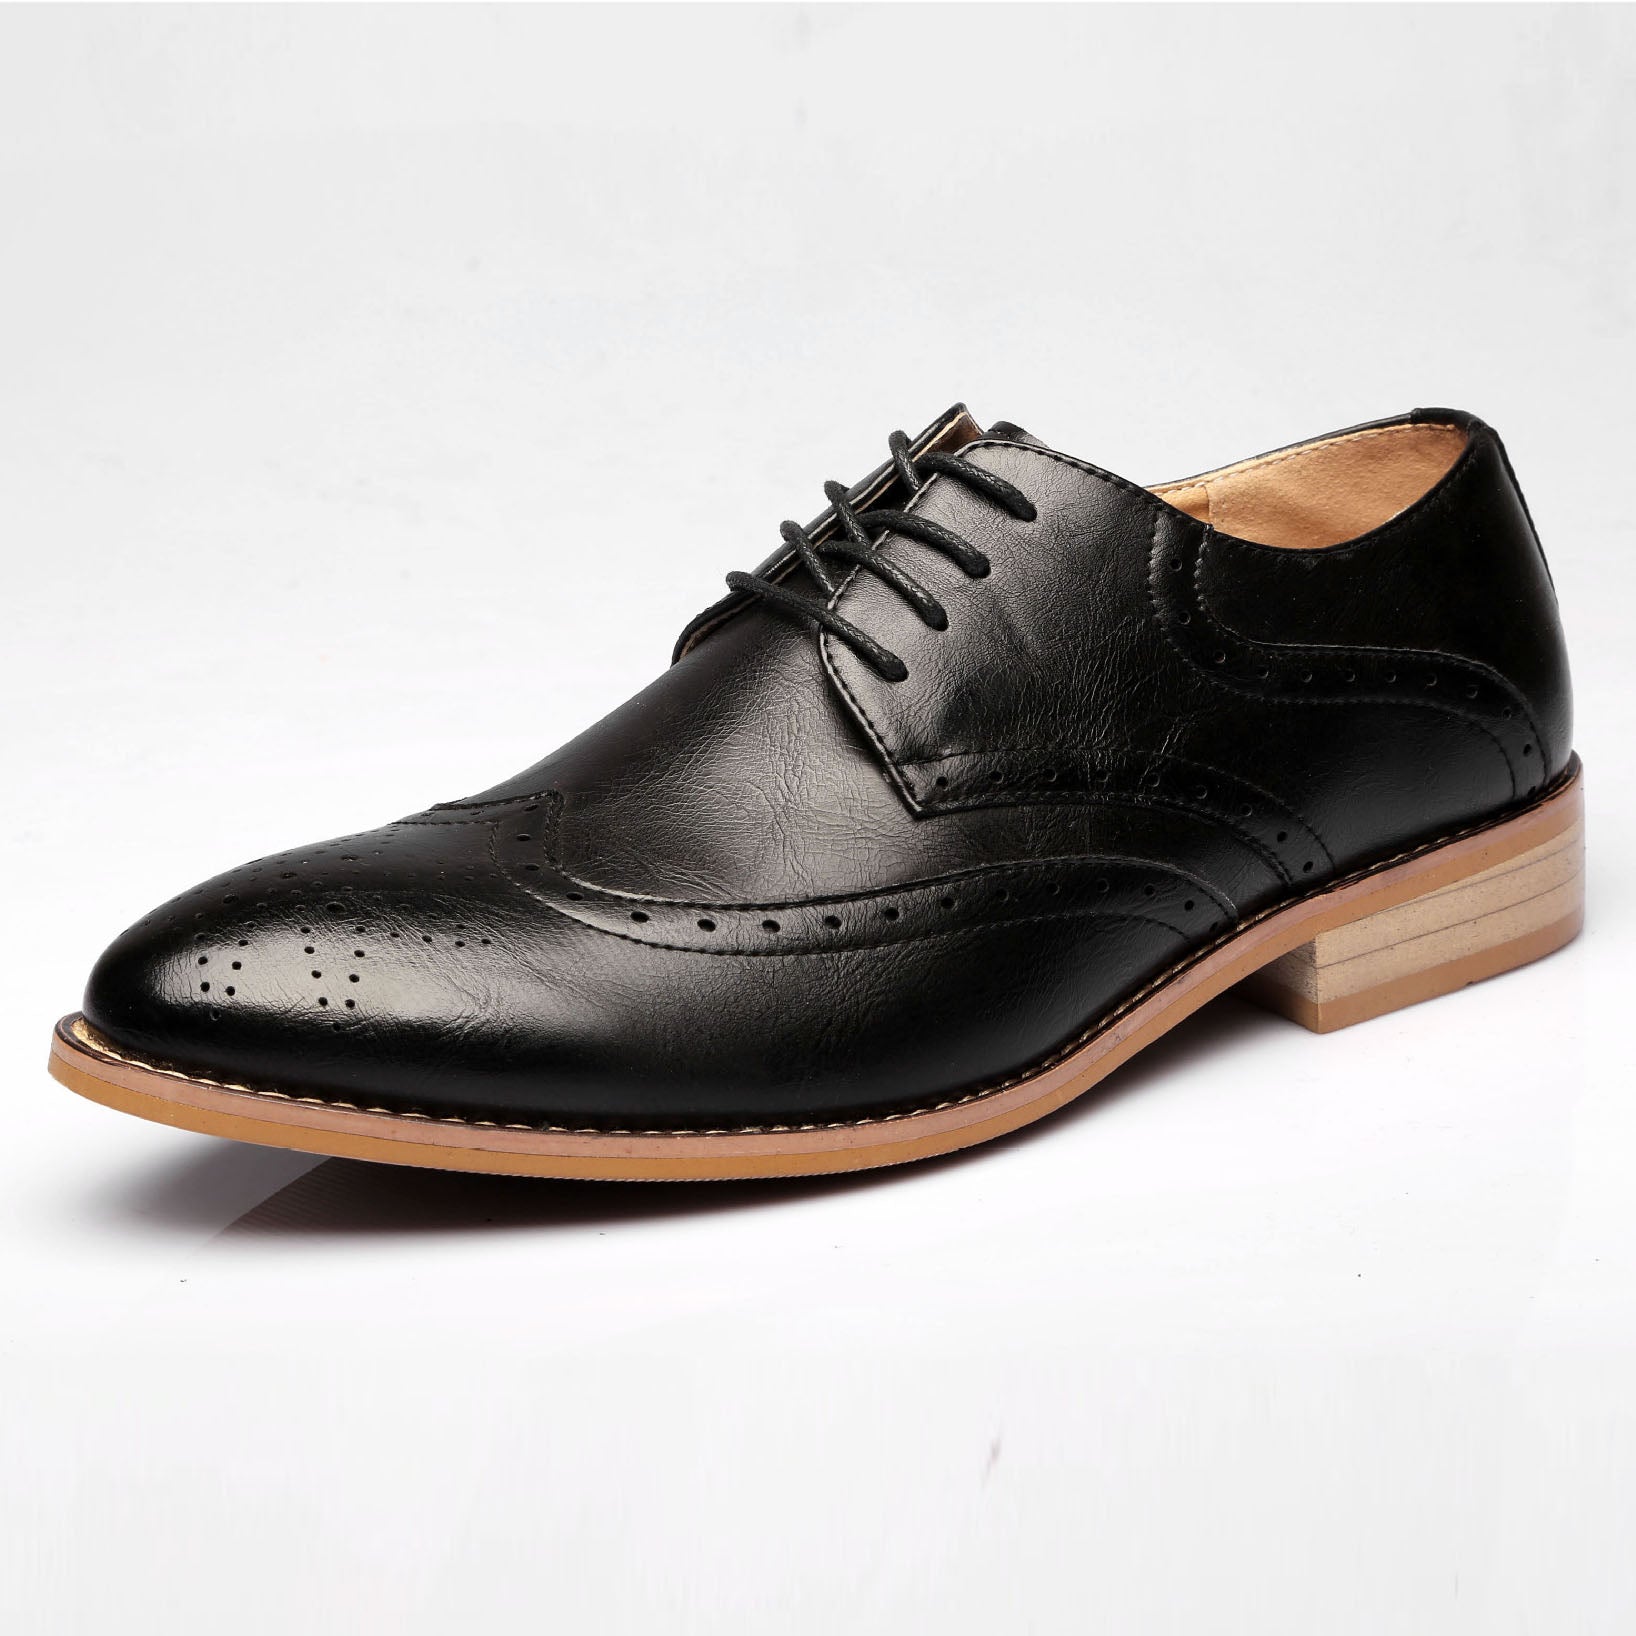 British leather shoes